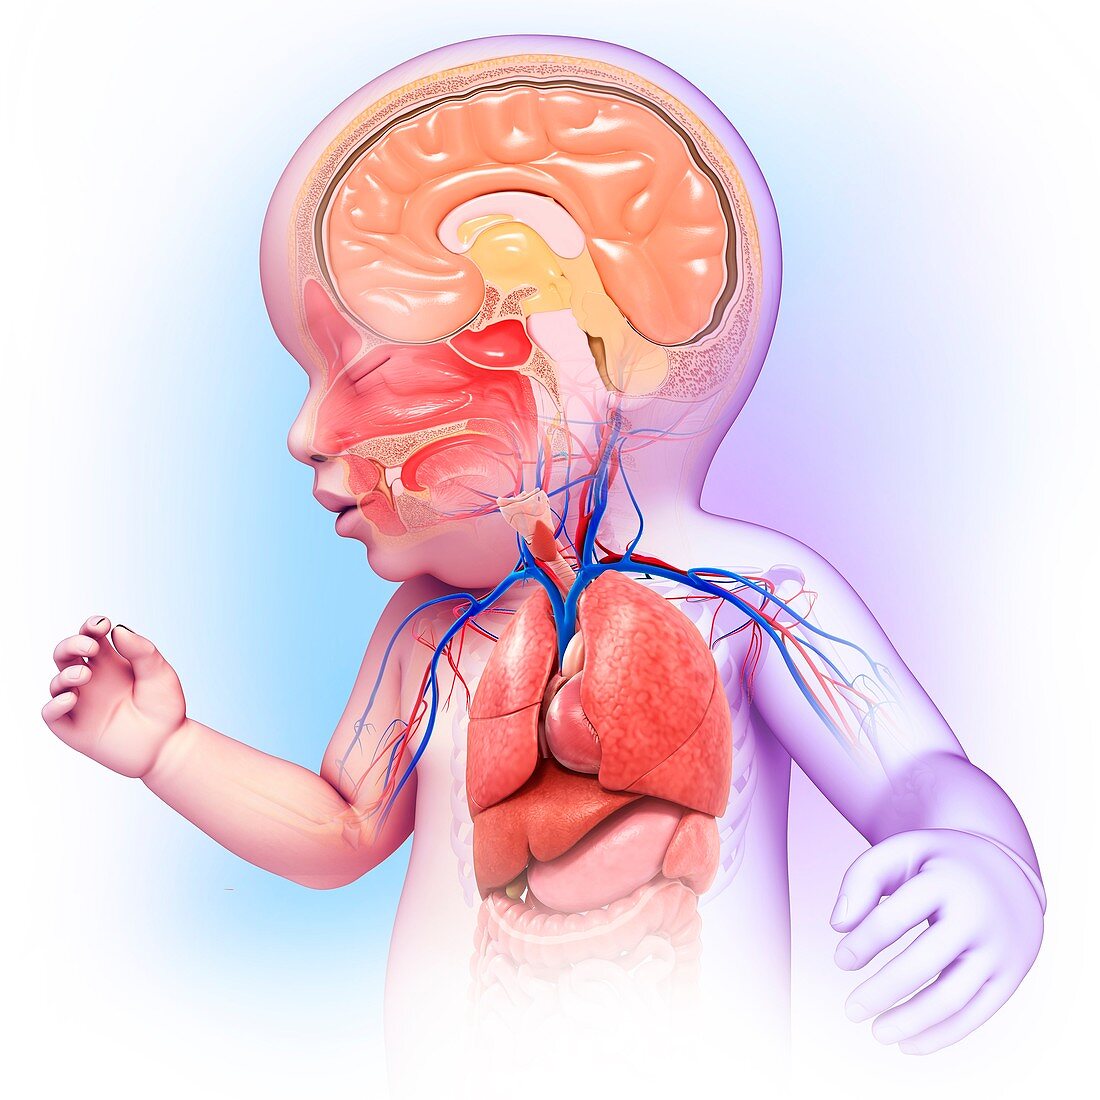 Baby's head and chest anatomy, illustration